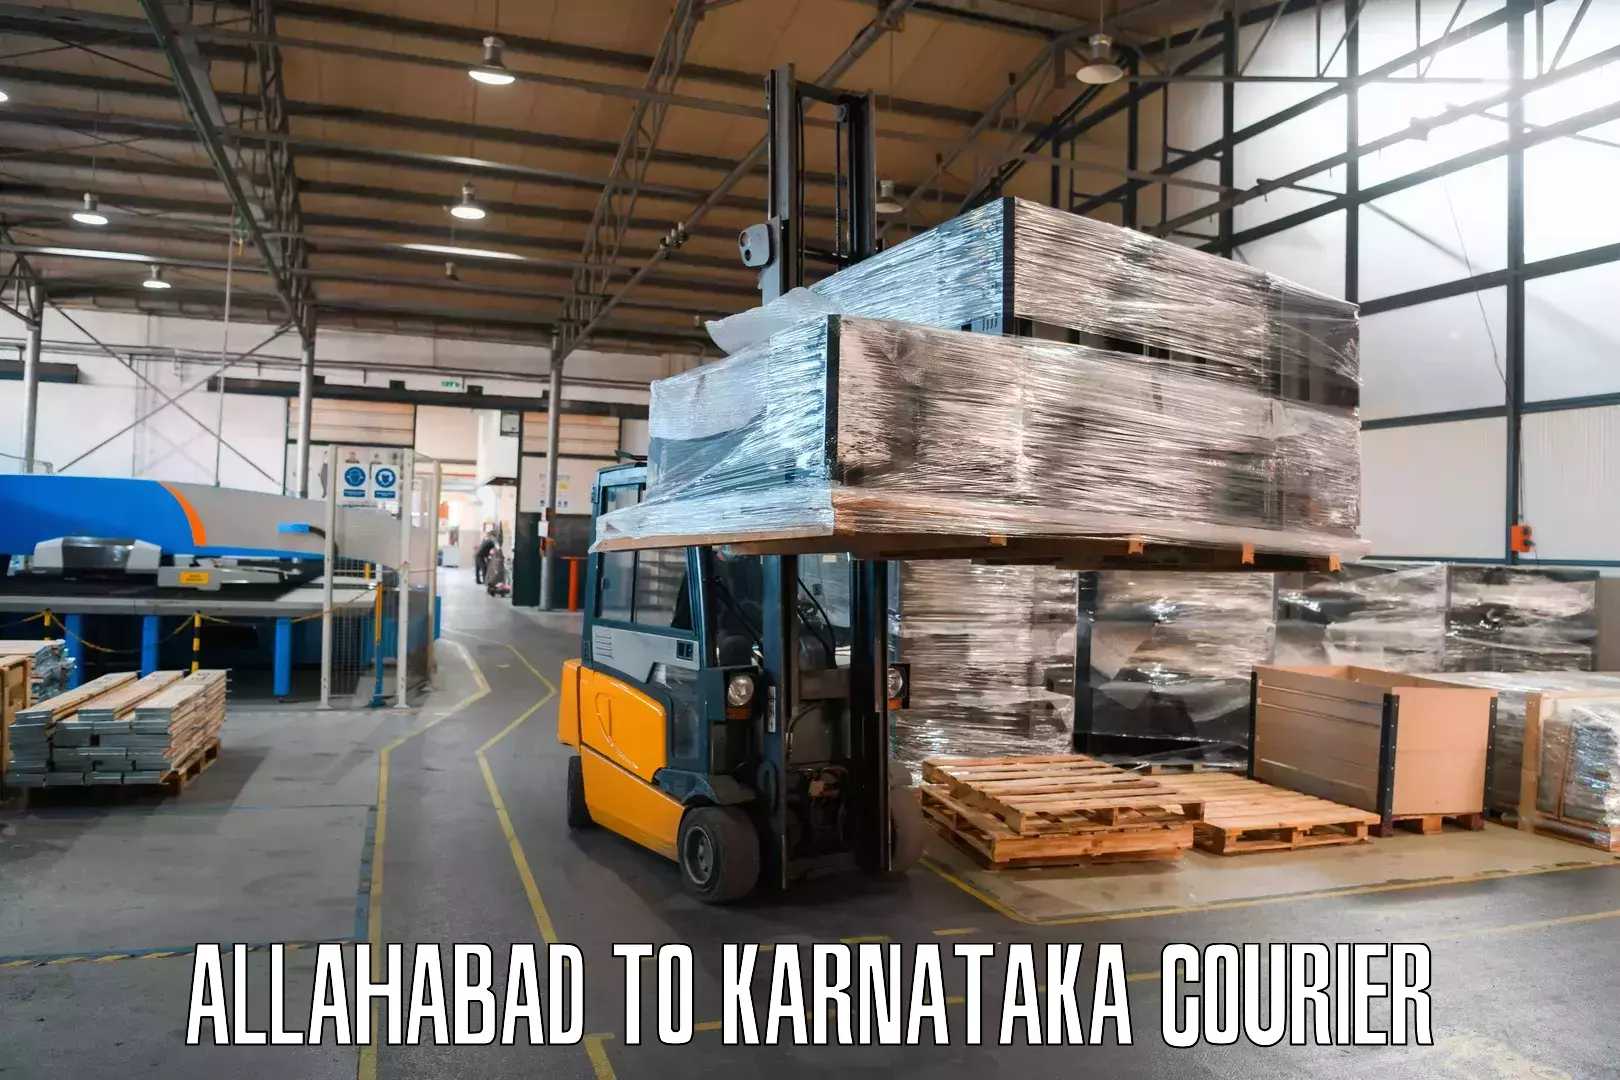 Global shipping networks Allahabad to Jagalur